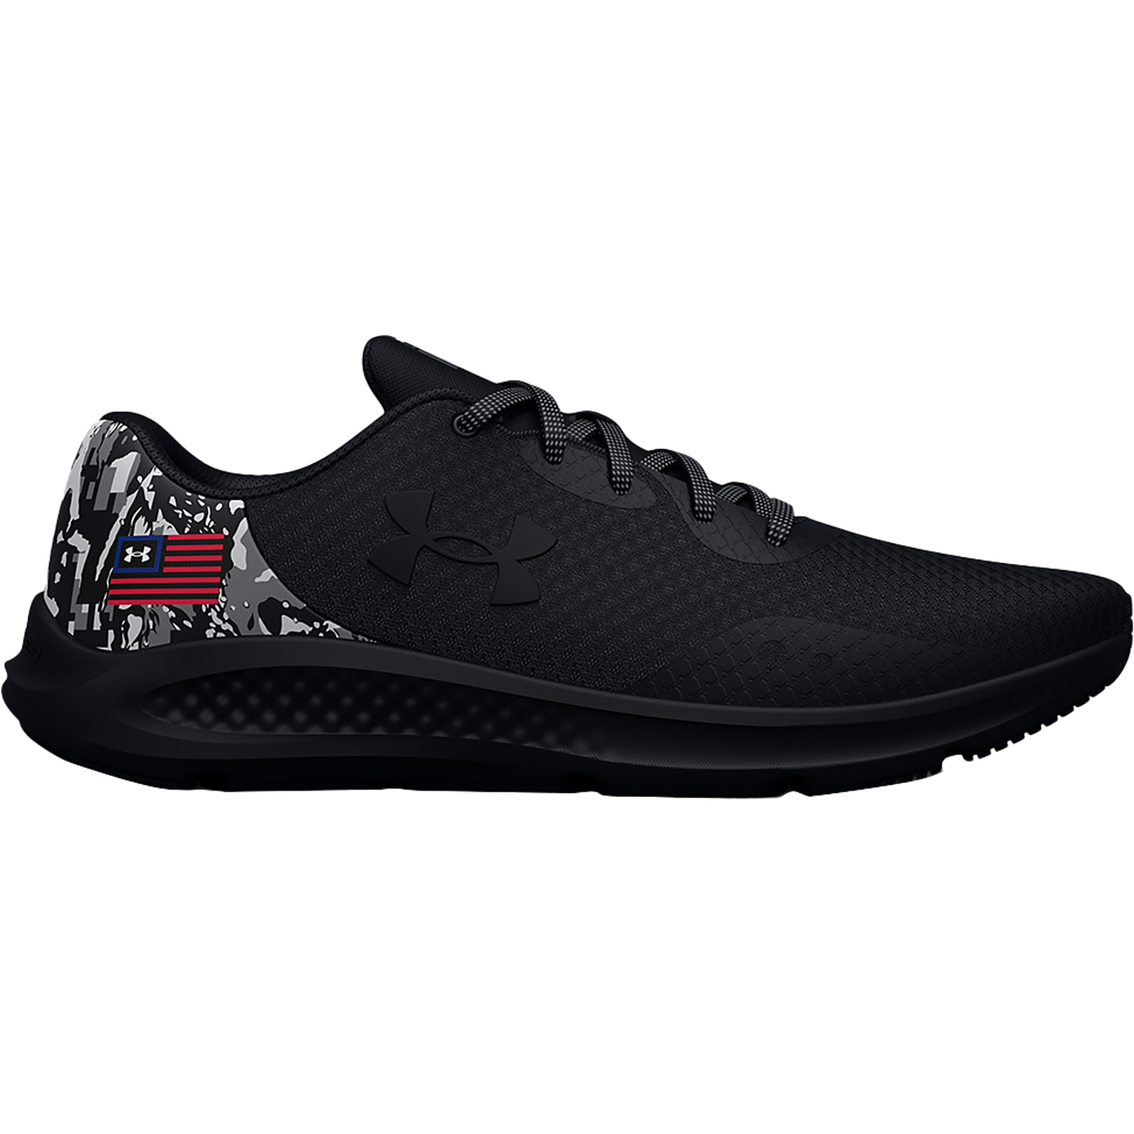 Under Armour Men's Charged Pursuit 3 Freedom Running Shoes - Image 2 of 5